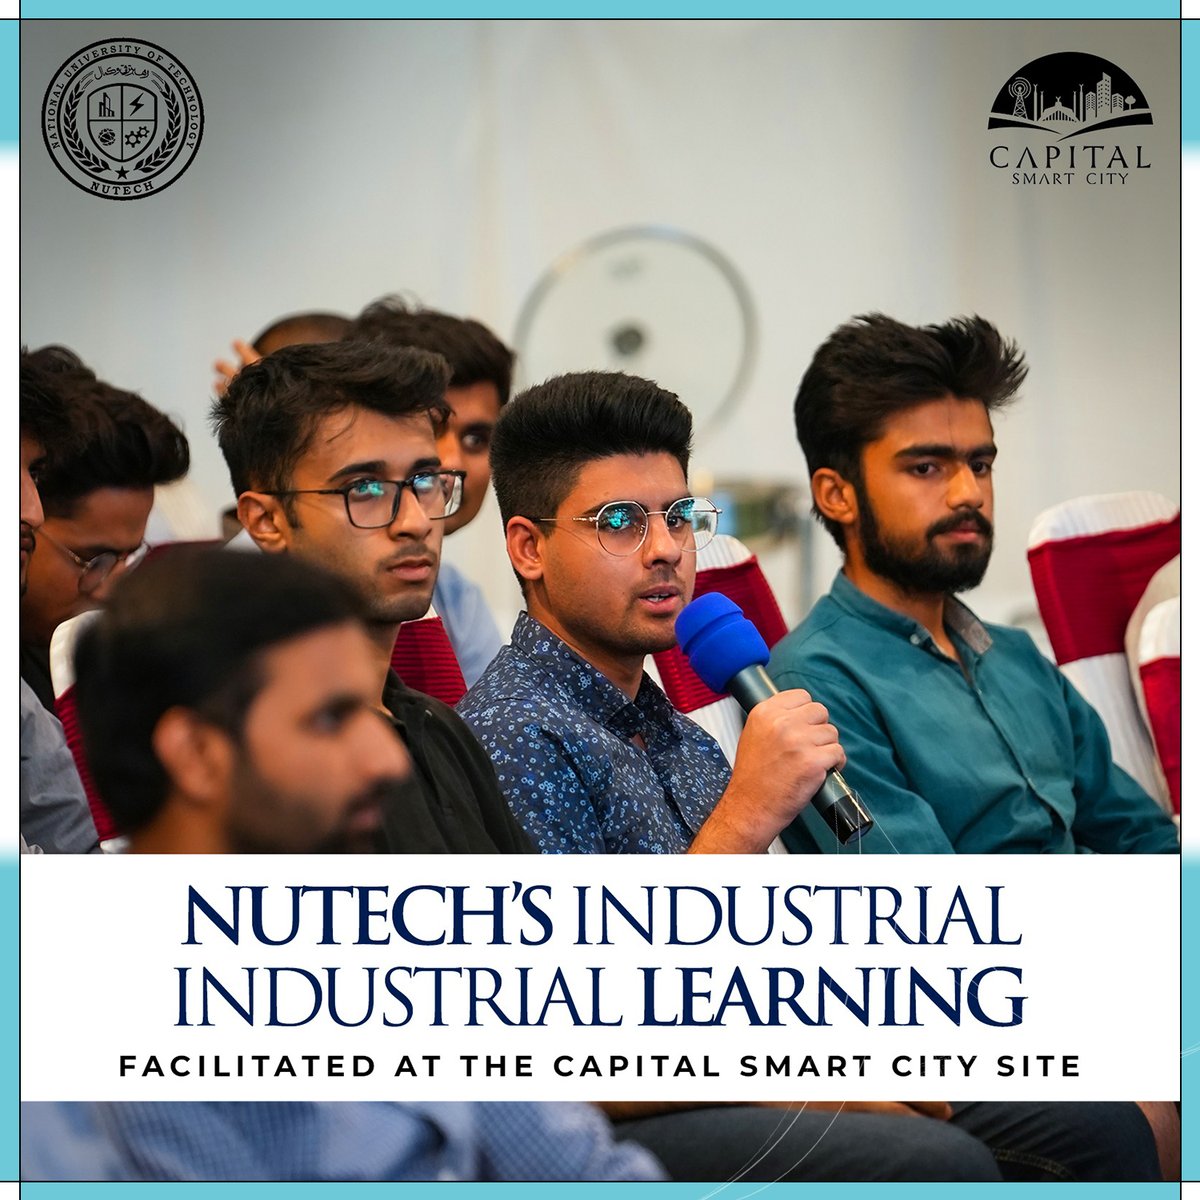 The Nutech delegation was warmly greeted by CSC management

#wehavejustbegun #capitalsmartcity #lahoresmartcity #arkaaconsultants #smartinterchange #SmartCities #propertyinvestment #investmentopportunity #plotsforsaleinislamabad #development #Islamabad #SmartFeatures #CSC #Nutech